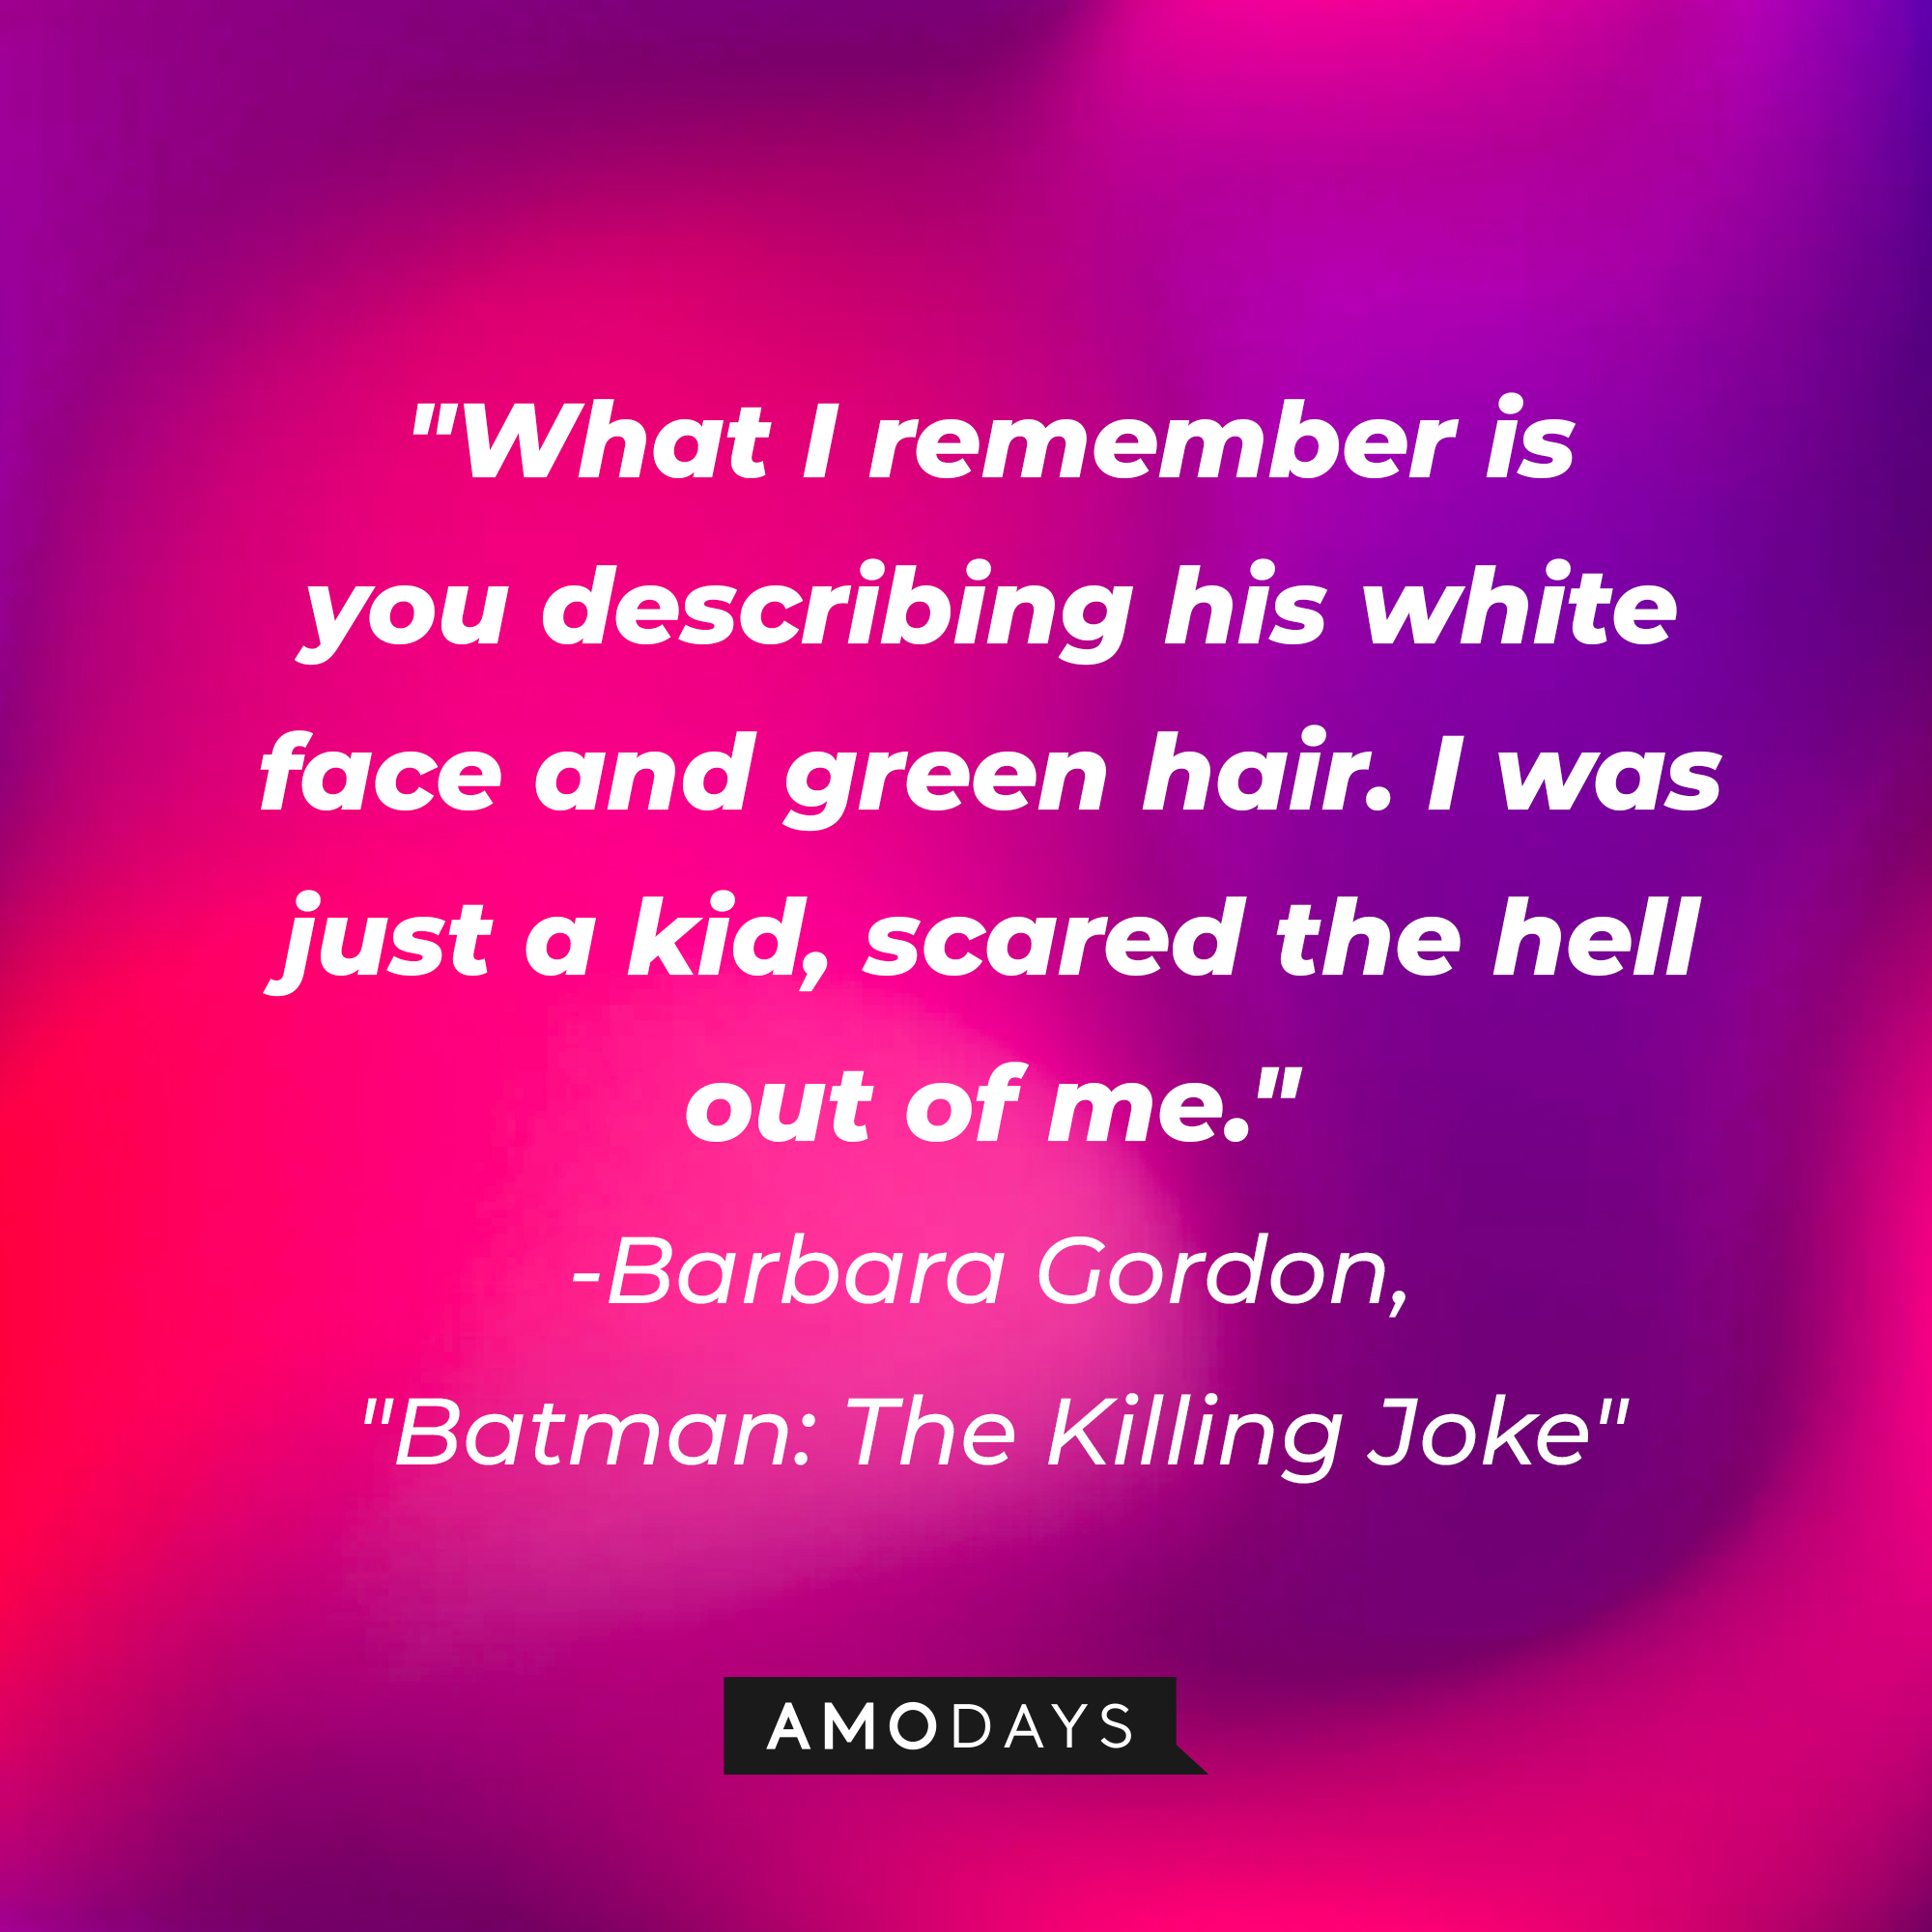 Barbara Gordon's quote from the "Batman: The Killing Joke" animated film: "What I remember is you describing his white face and green hair. I was just a kid, scared the hell out of me." | Source: AmoDays